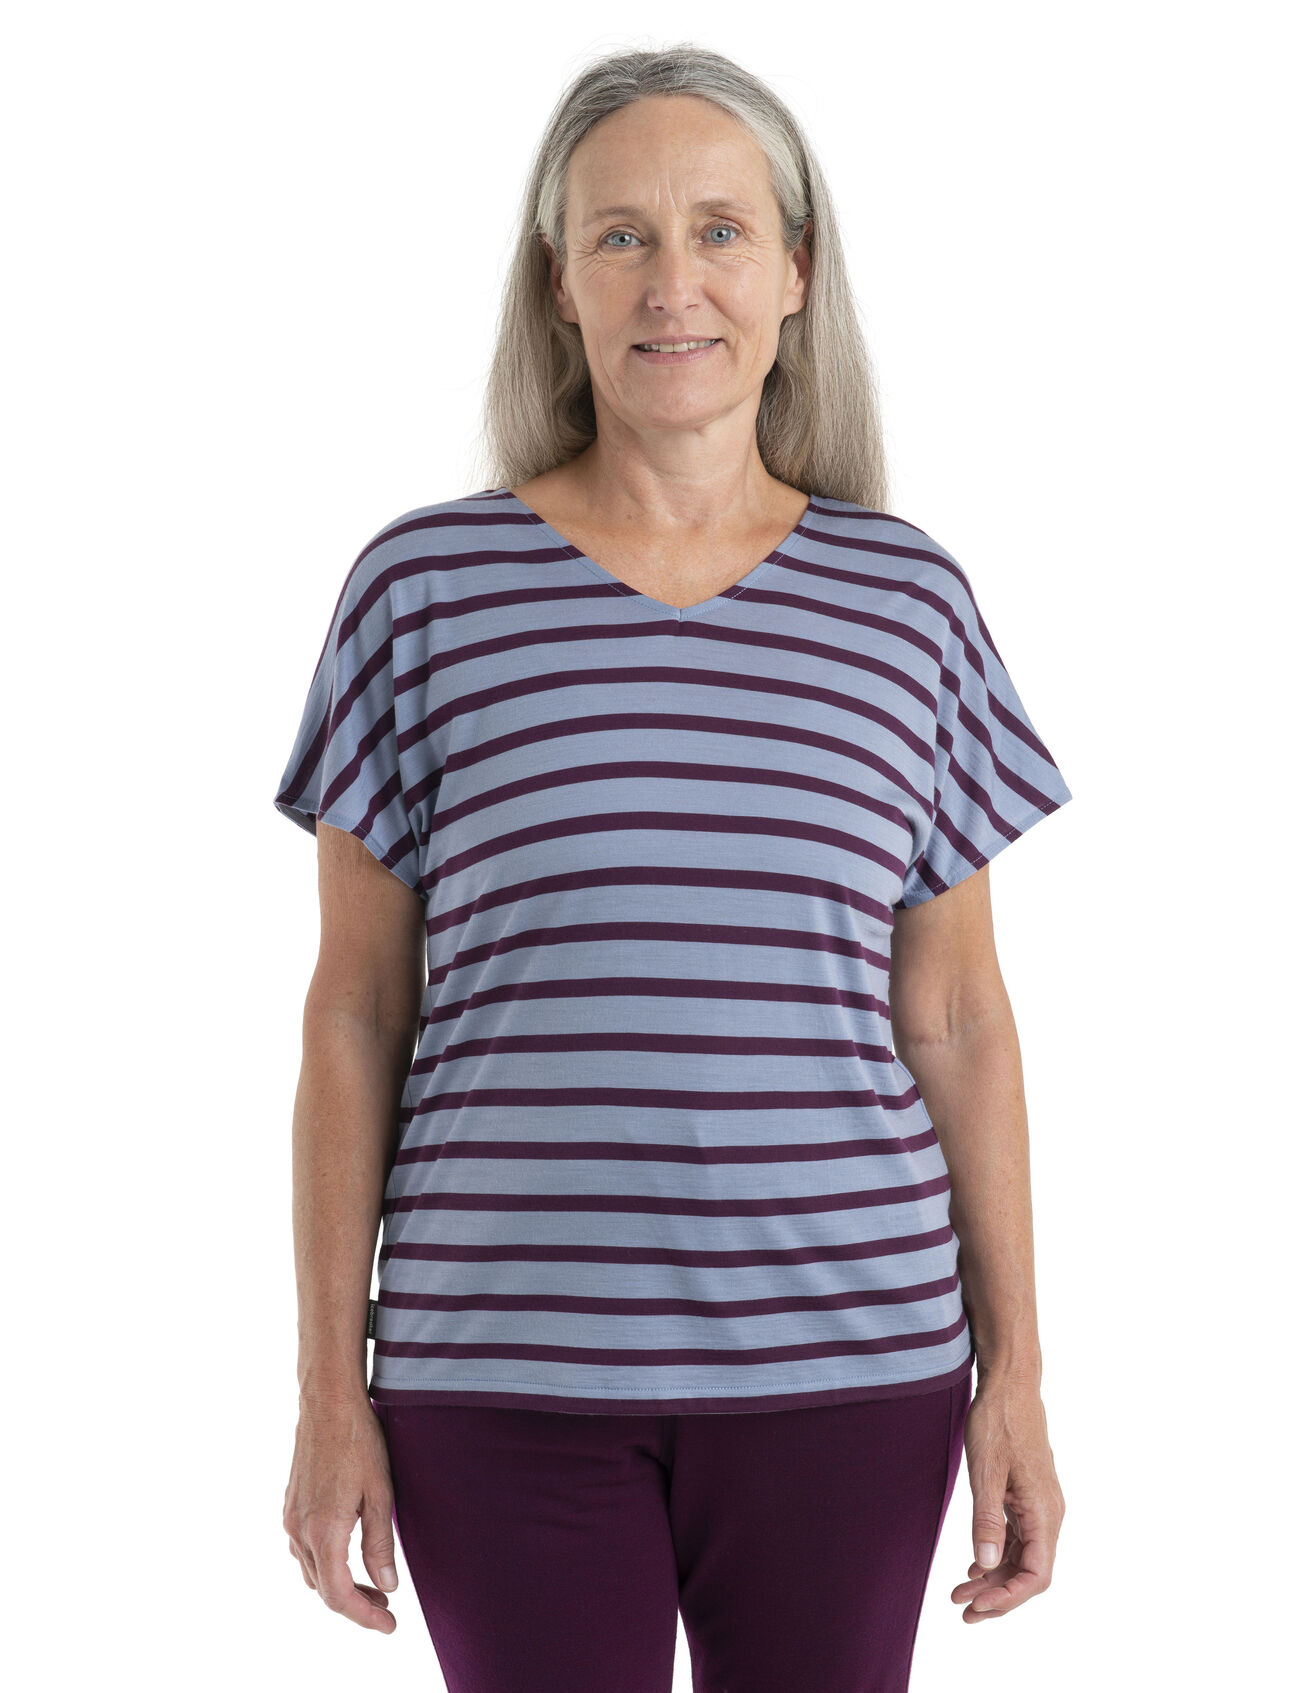 Womens Merino Drayden Reversible Short Sleeve Top Stripe A versatile everyday shirt featuring our Cool-Lite™jersey fabric, the Drayden Reversible Short Sleeve Top Stripe can be worn frontwards for a soft V neck, or backwards for a high crew neck.